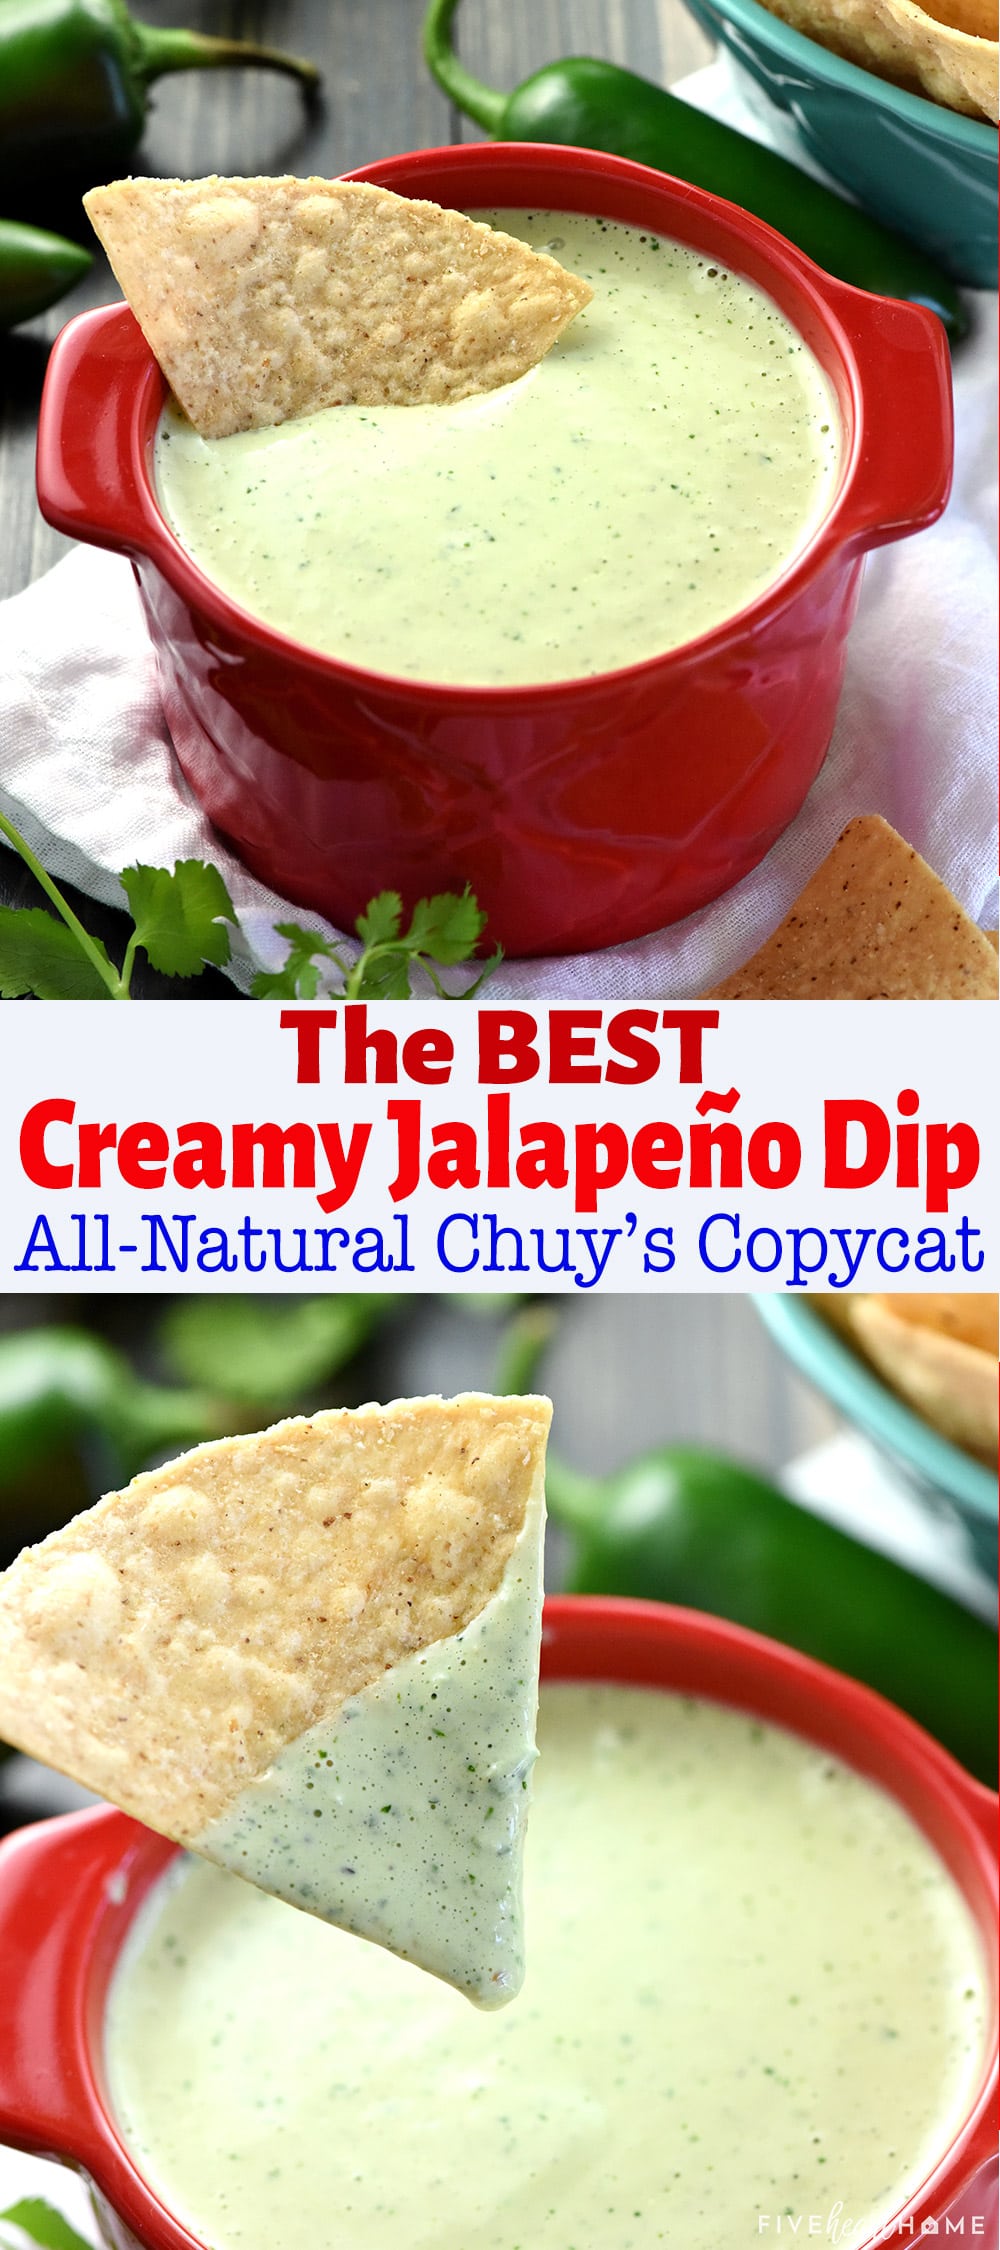 Creamy Jalapeño Dip ~ an all-natural copycat recipe of the popular dip from Chuy’s, made with a handful of real ingredients including fresh jalapeños, cilantro, and salsa verde! | FiveHeartHome.com via @fivehearthome